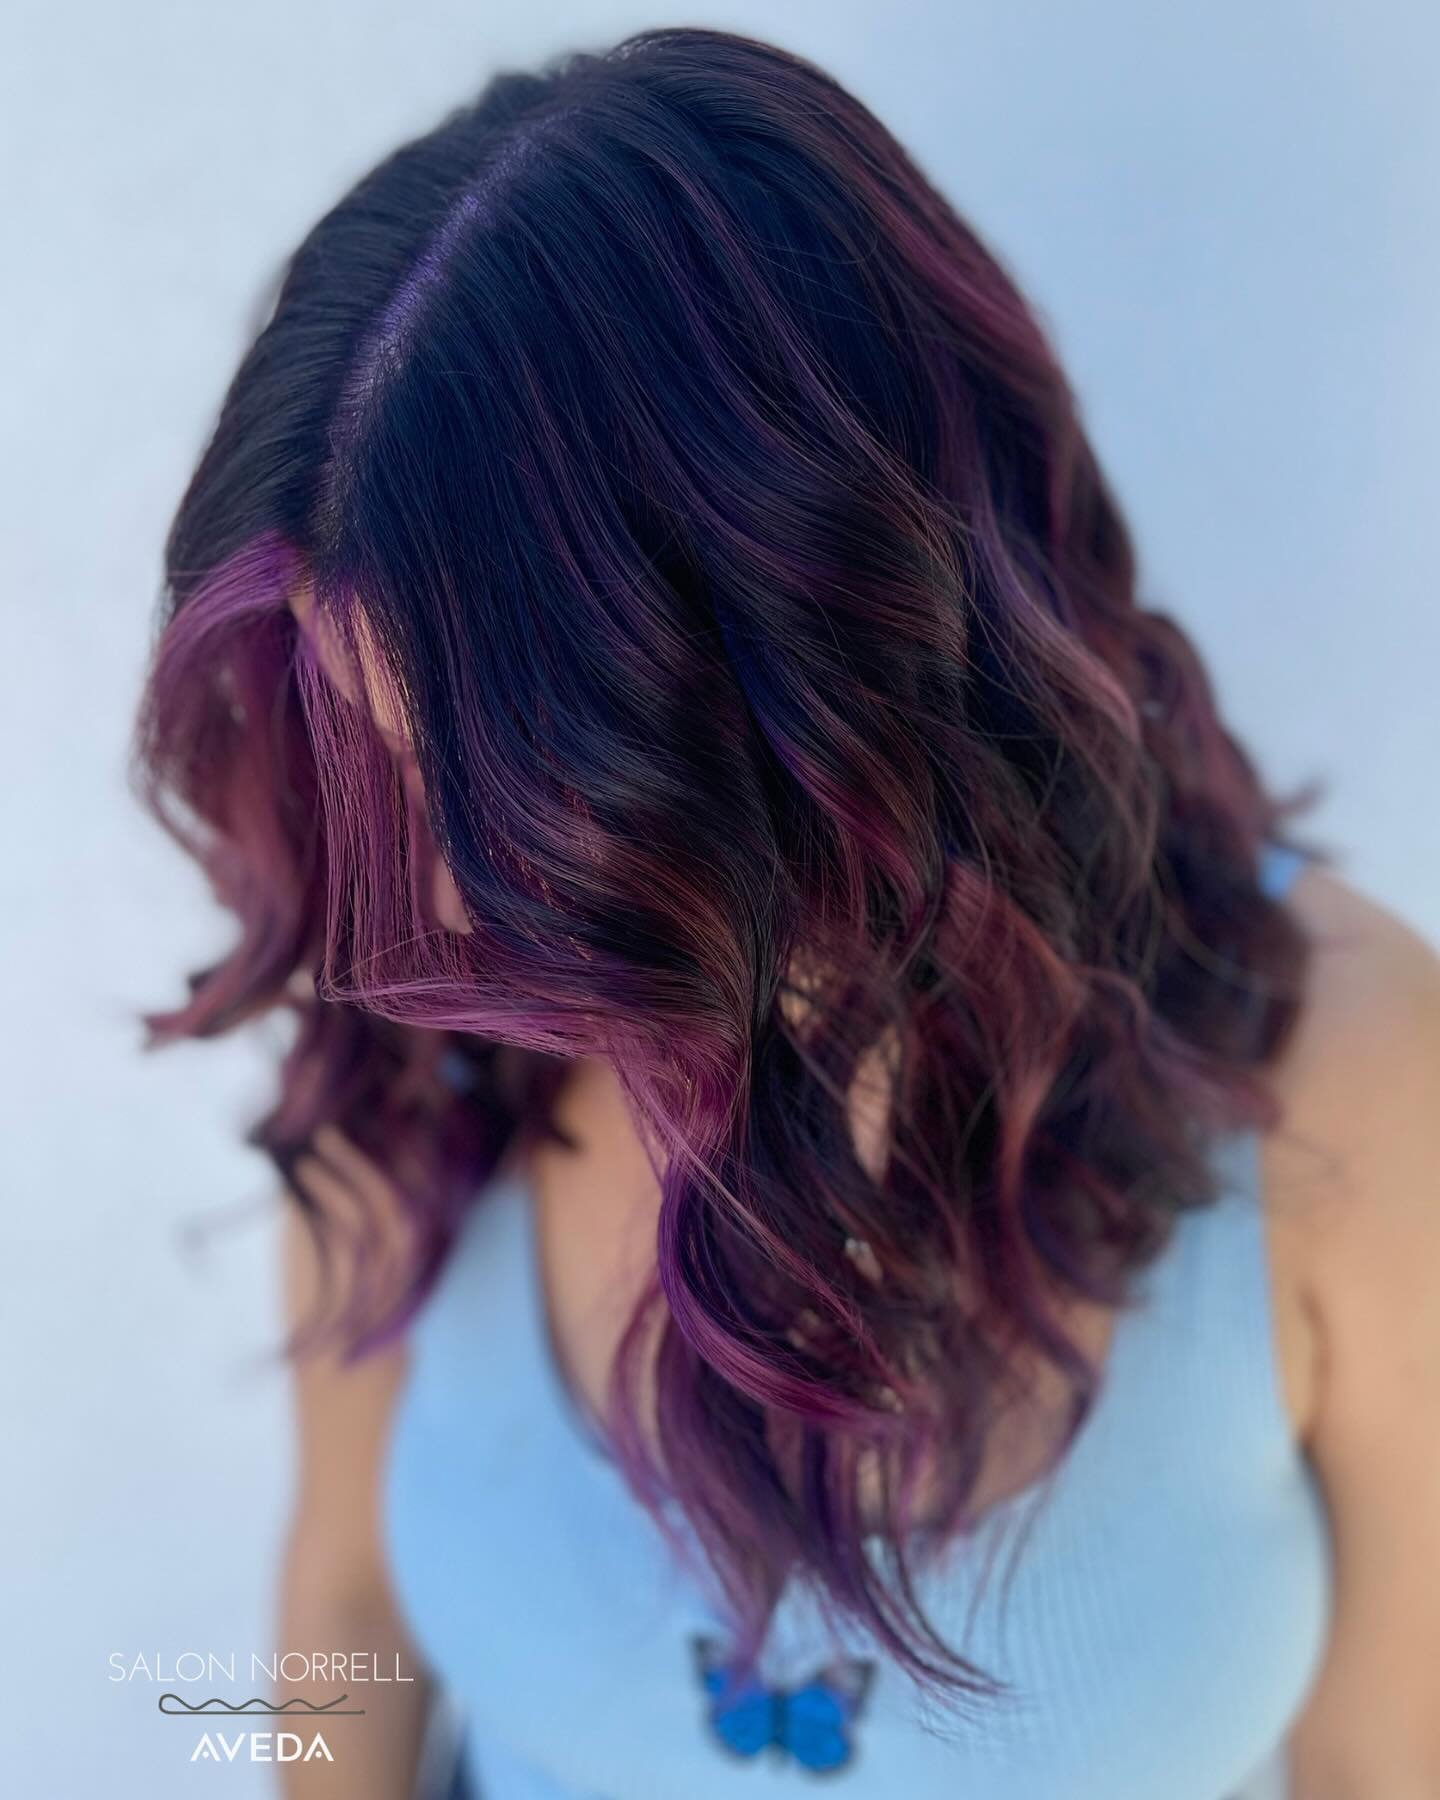 Hair | olivia 
Make your reservation today! 
🗓Reservations are best
 📲Text 813-590-6765 
☎️Call 813-265-2000
 🔗 Link in bio to book online 
💻TampaAveda.com 
📍Tampa, Florida 
🏷 tag us #salonnorrell